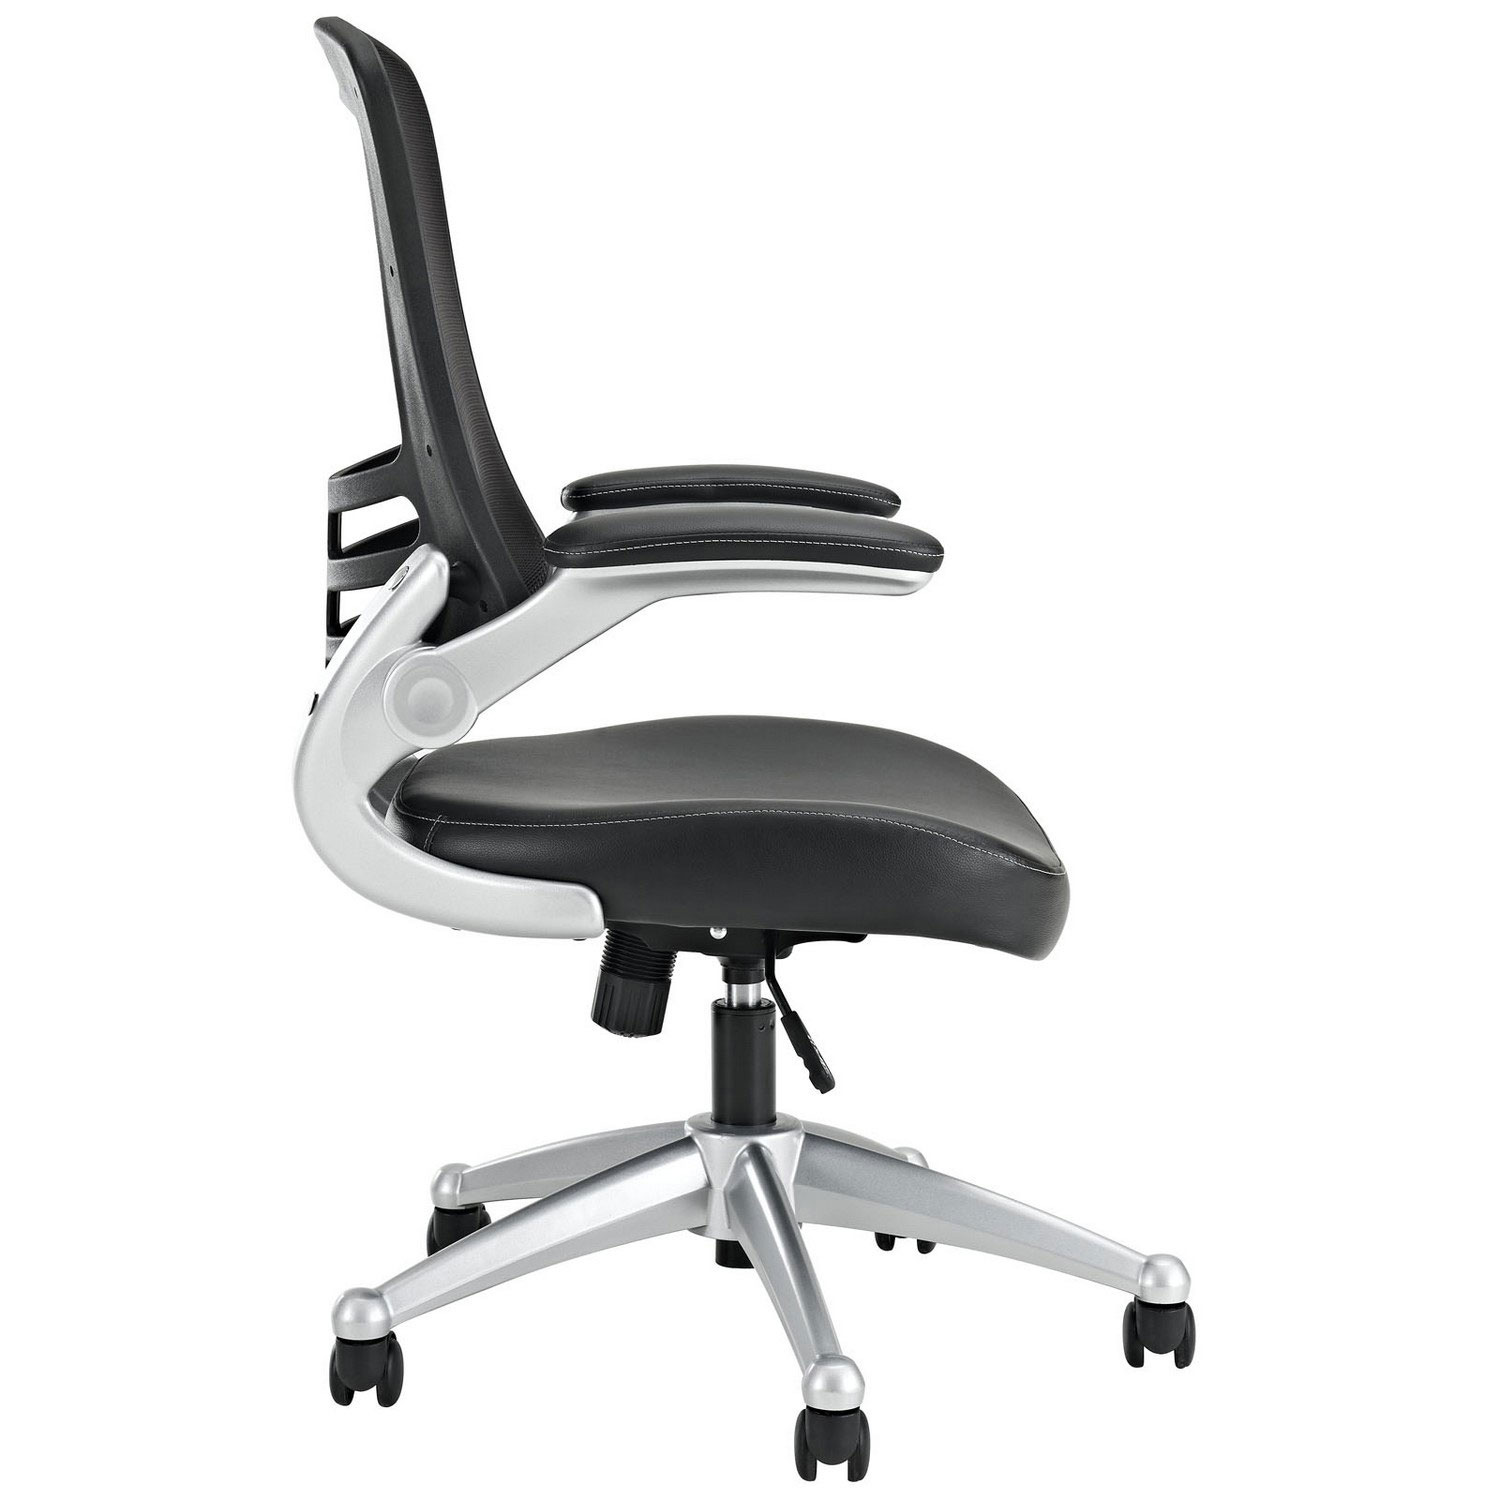 Modway Attainment Office Chair - Black